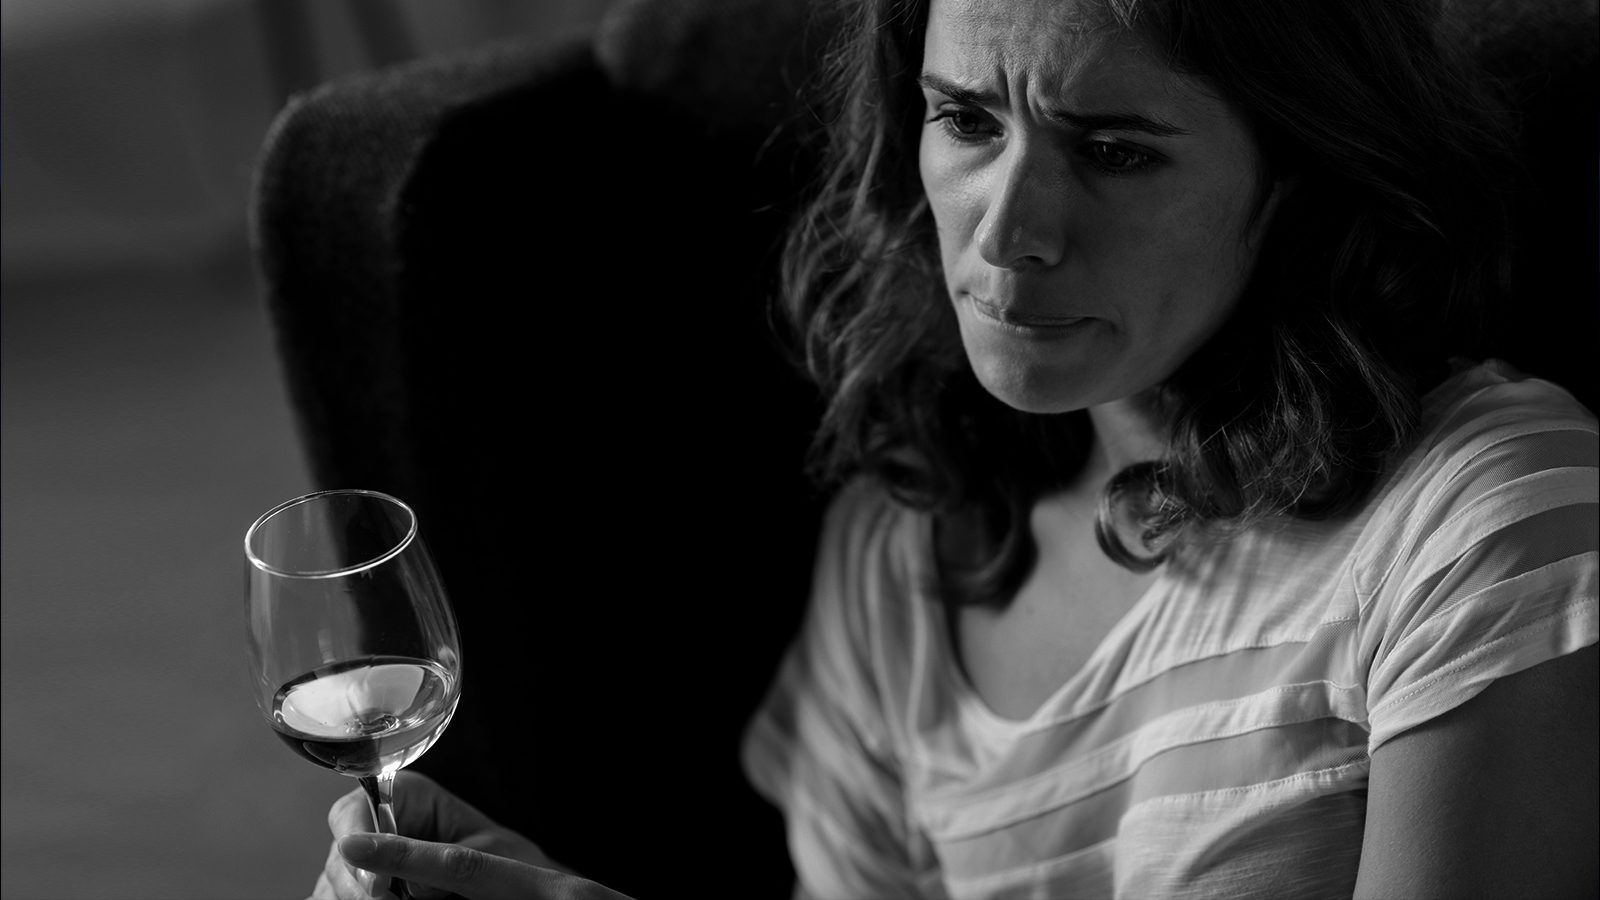 10 Ways Drinking Alcohol Harms Your Mental Health